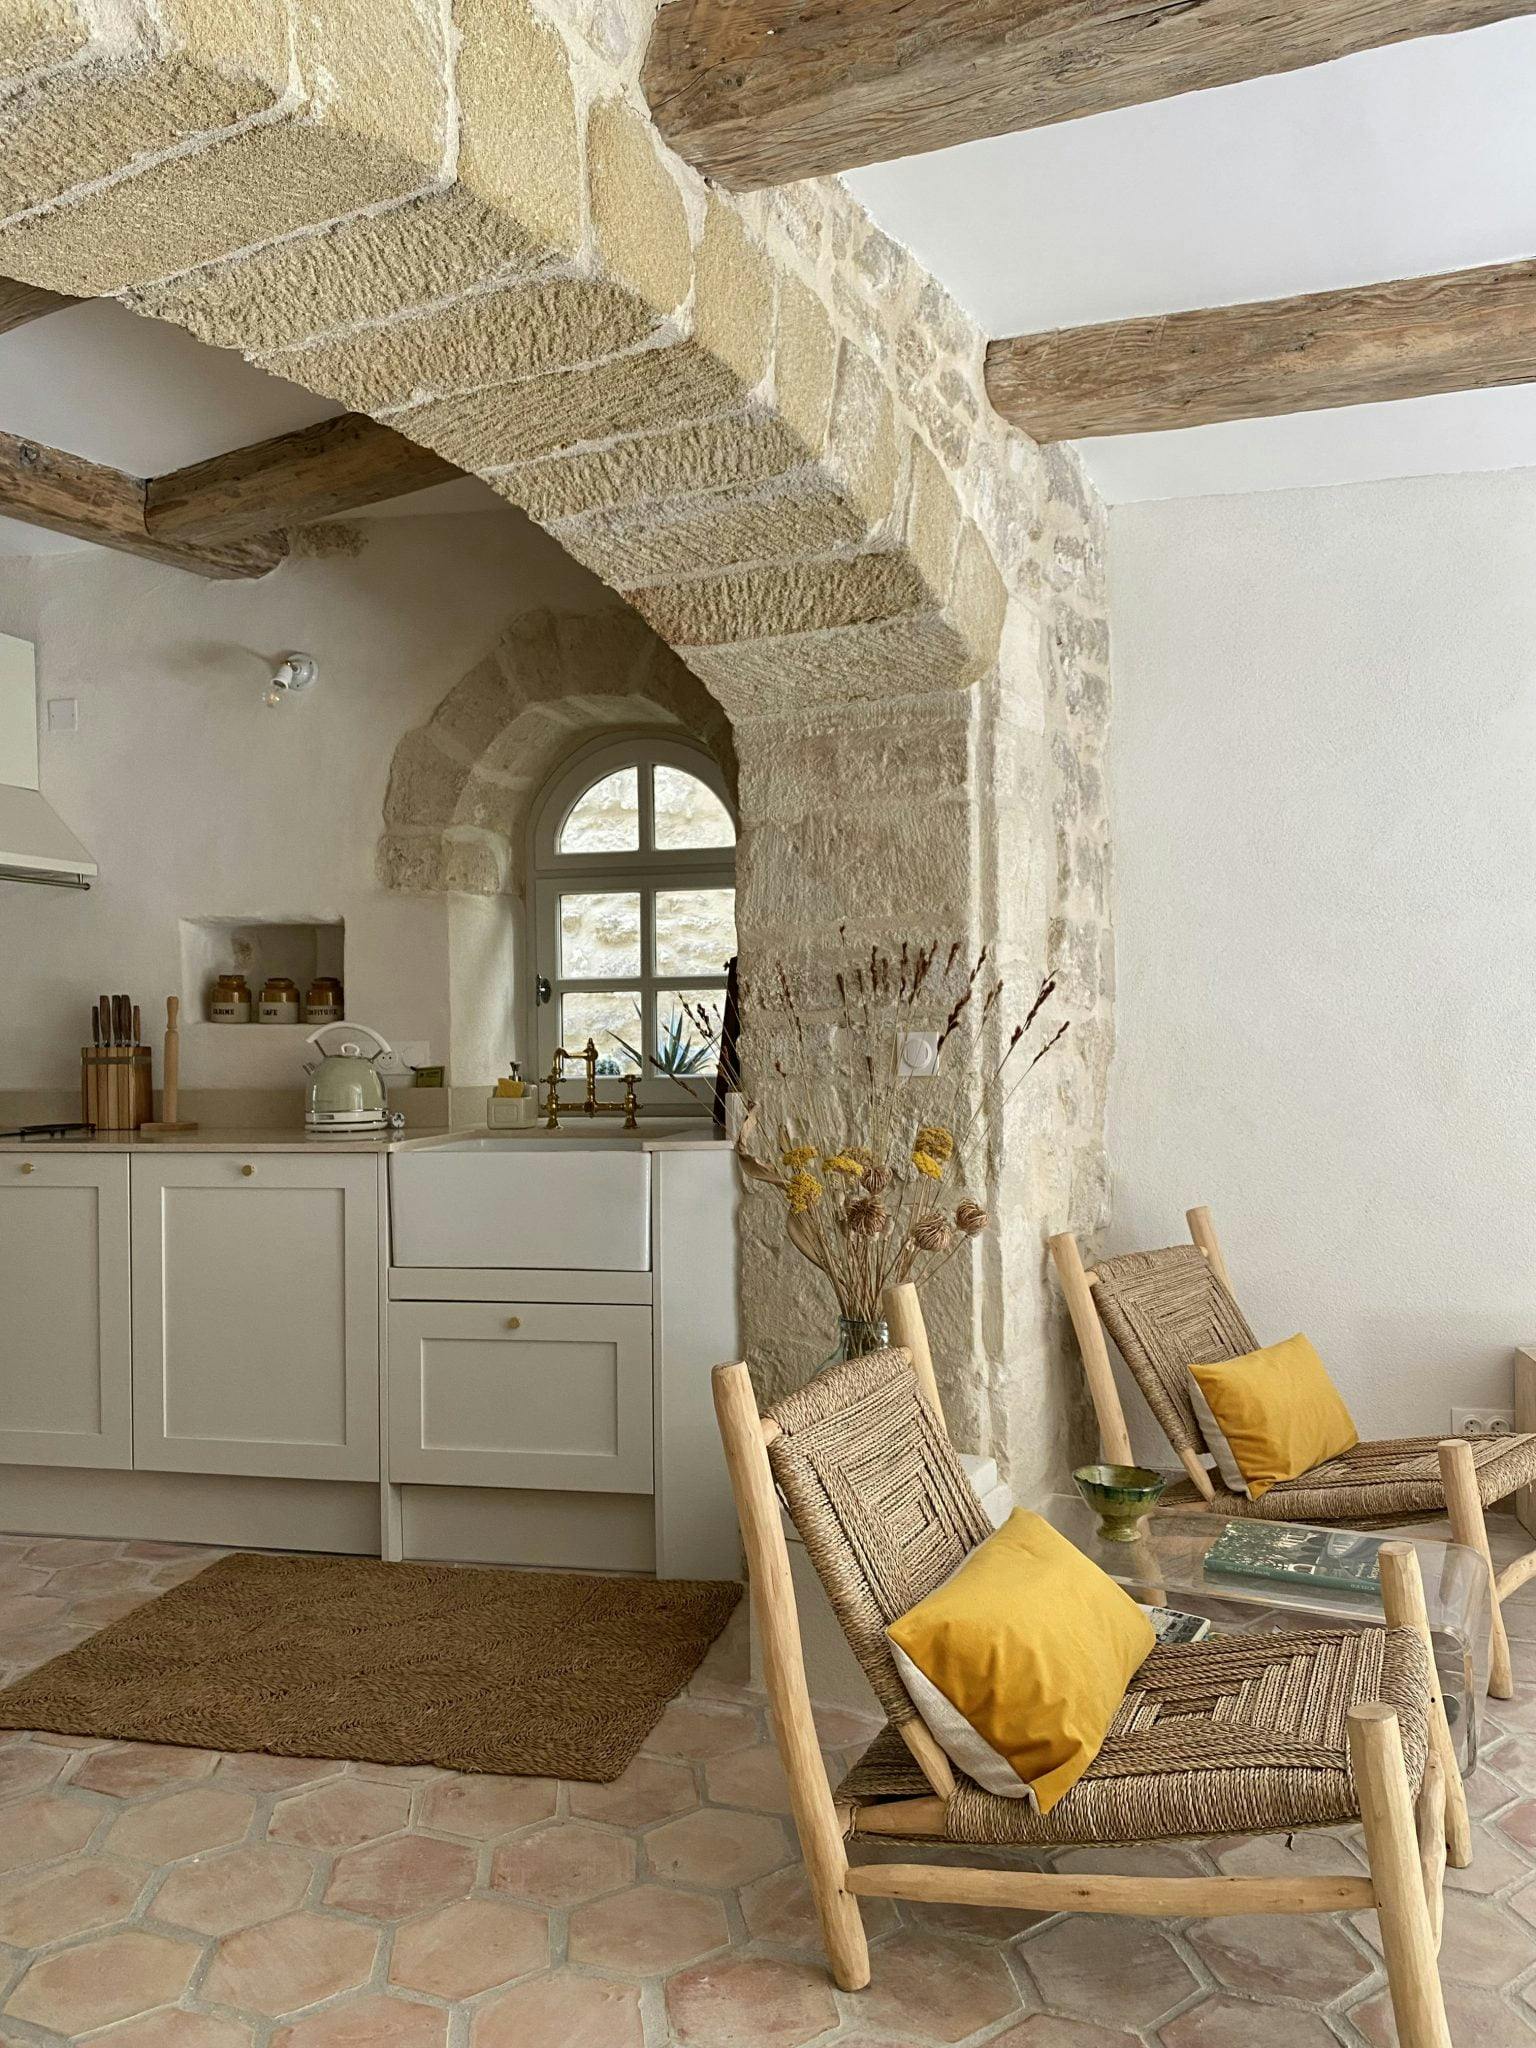 A large stone archway joins the kitchen and living room.